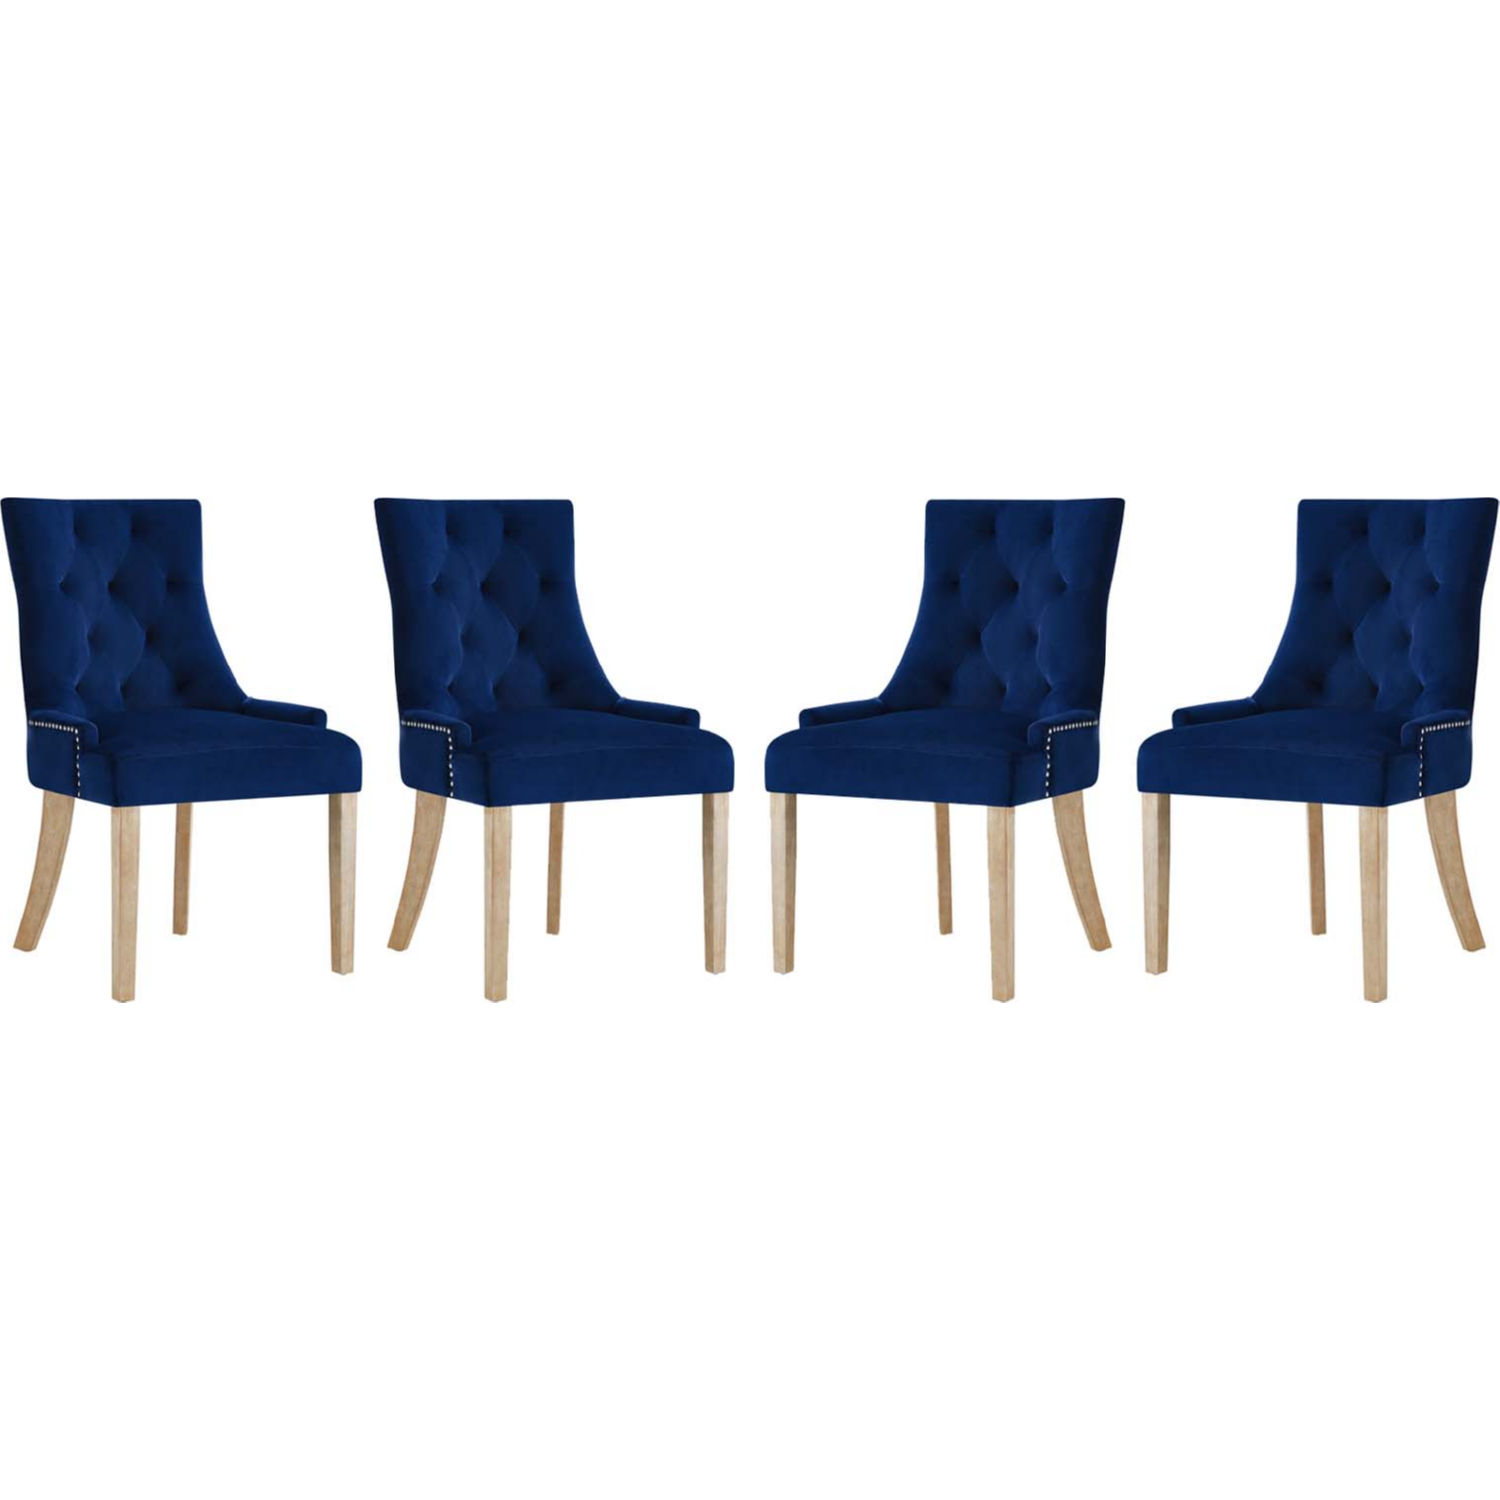 Modway Eei 3505 Nav Pose Dining Chair, Navy Blue Dining Chairs Set Of 4